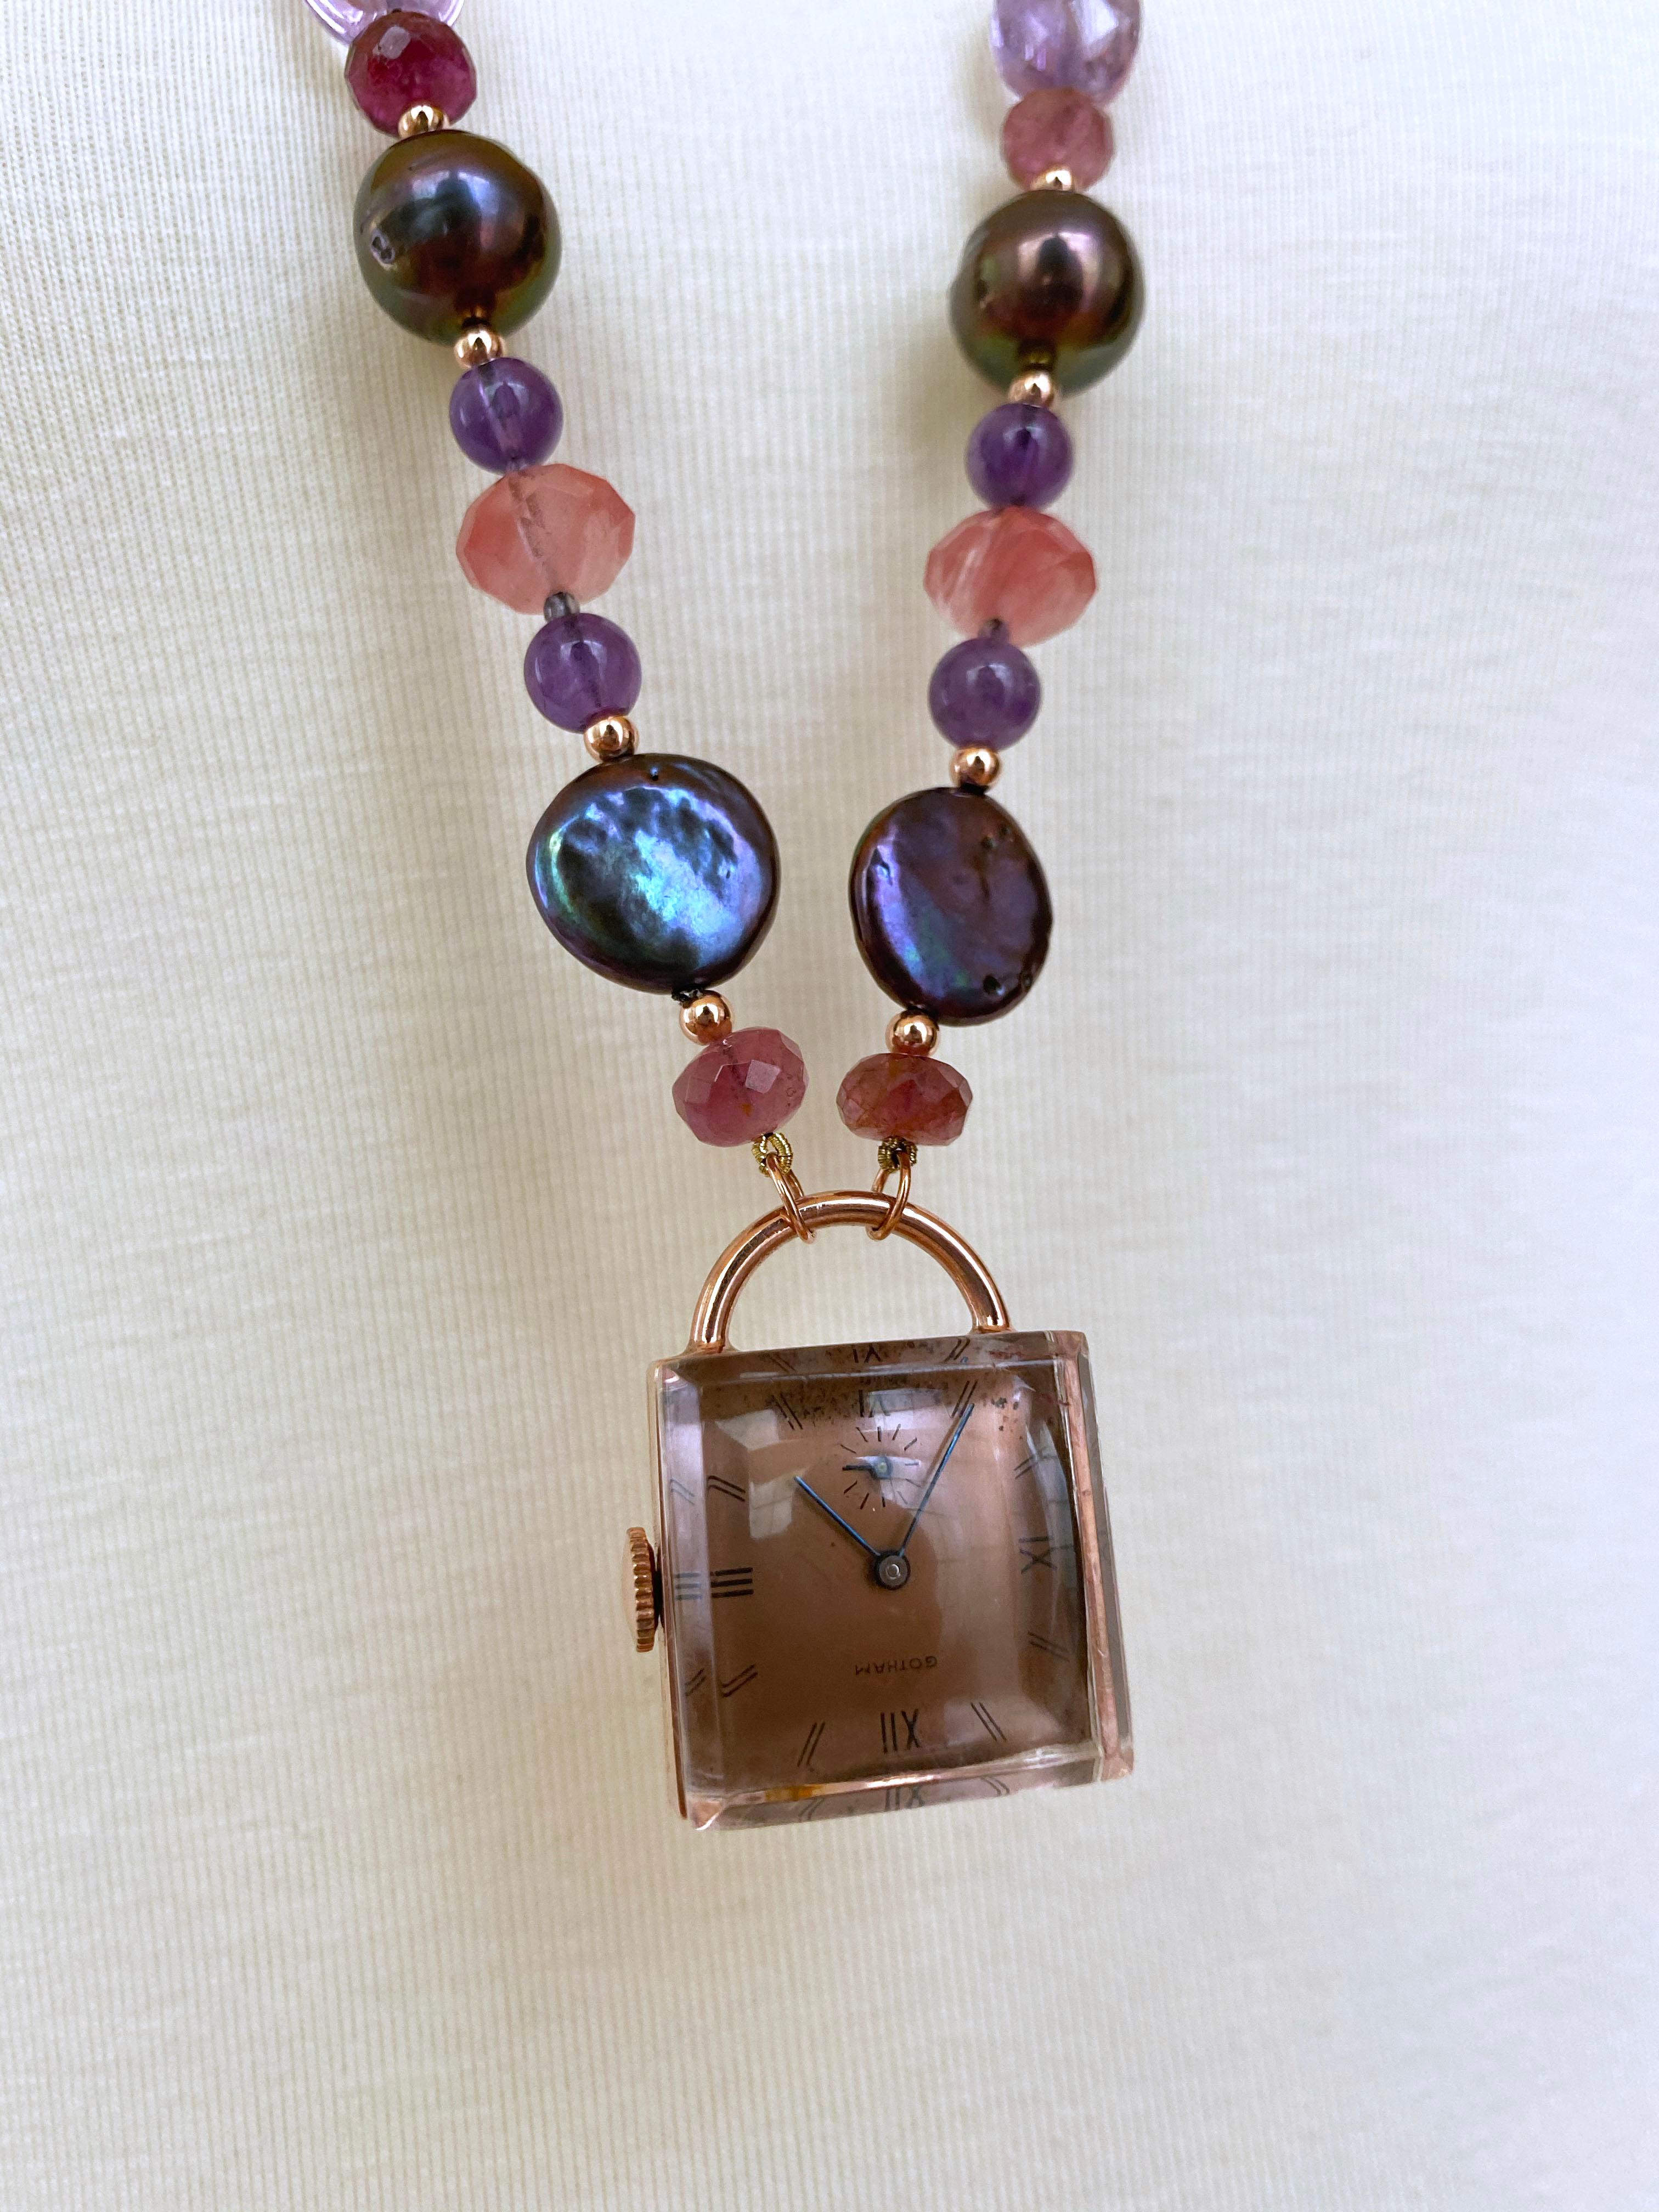 Bead Marina J. Black Pearl, Amethyst, Pink Tourmaline and Rose Gold Watch Sautoir For Sale